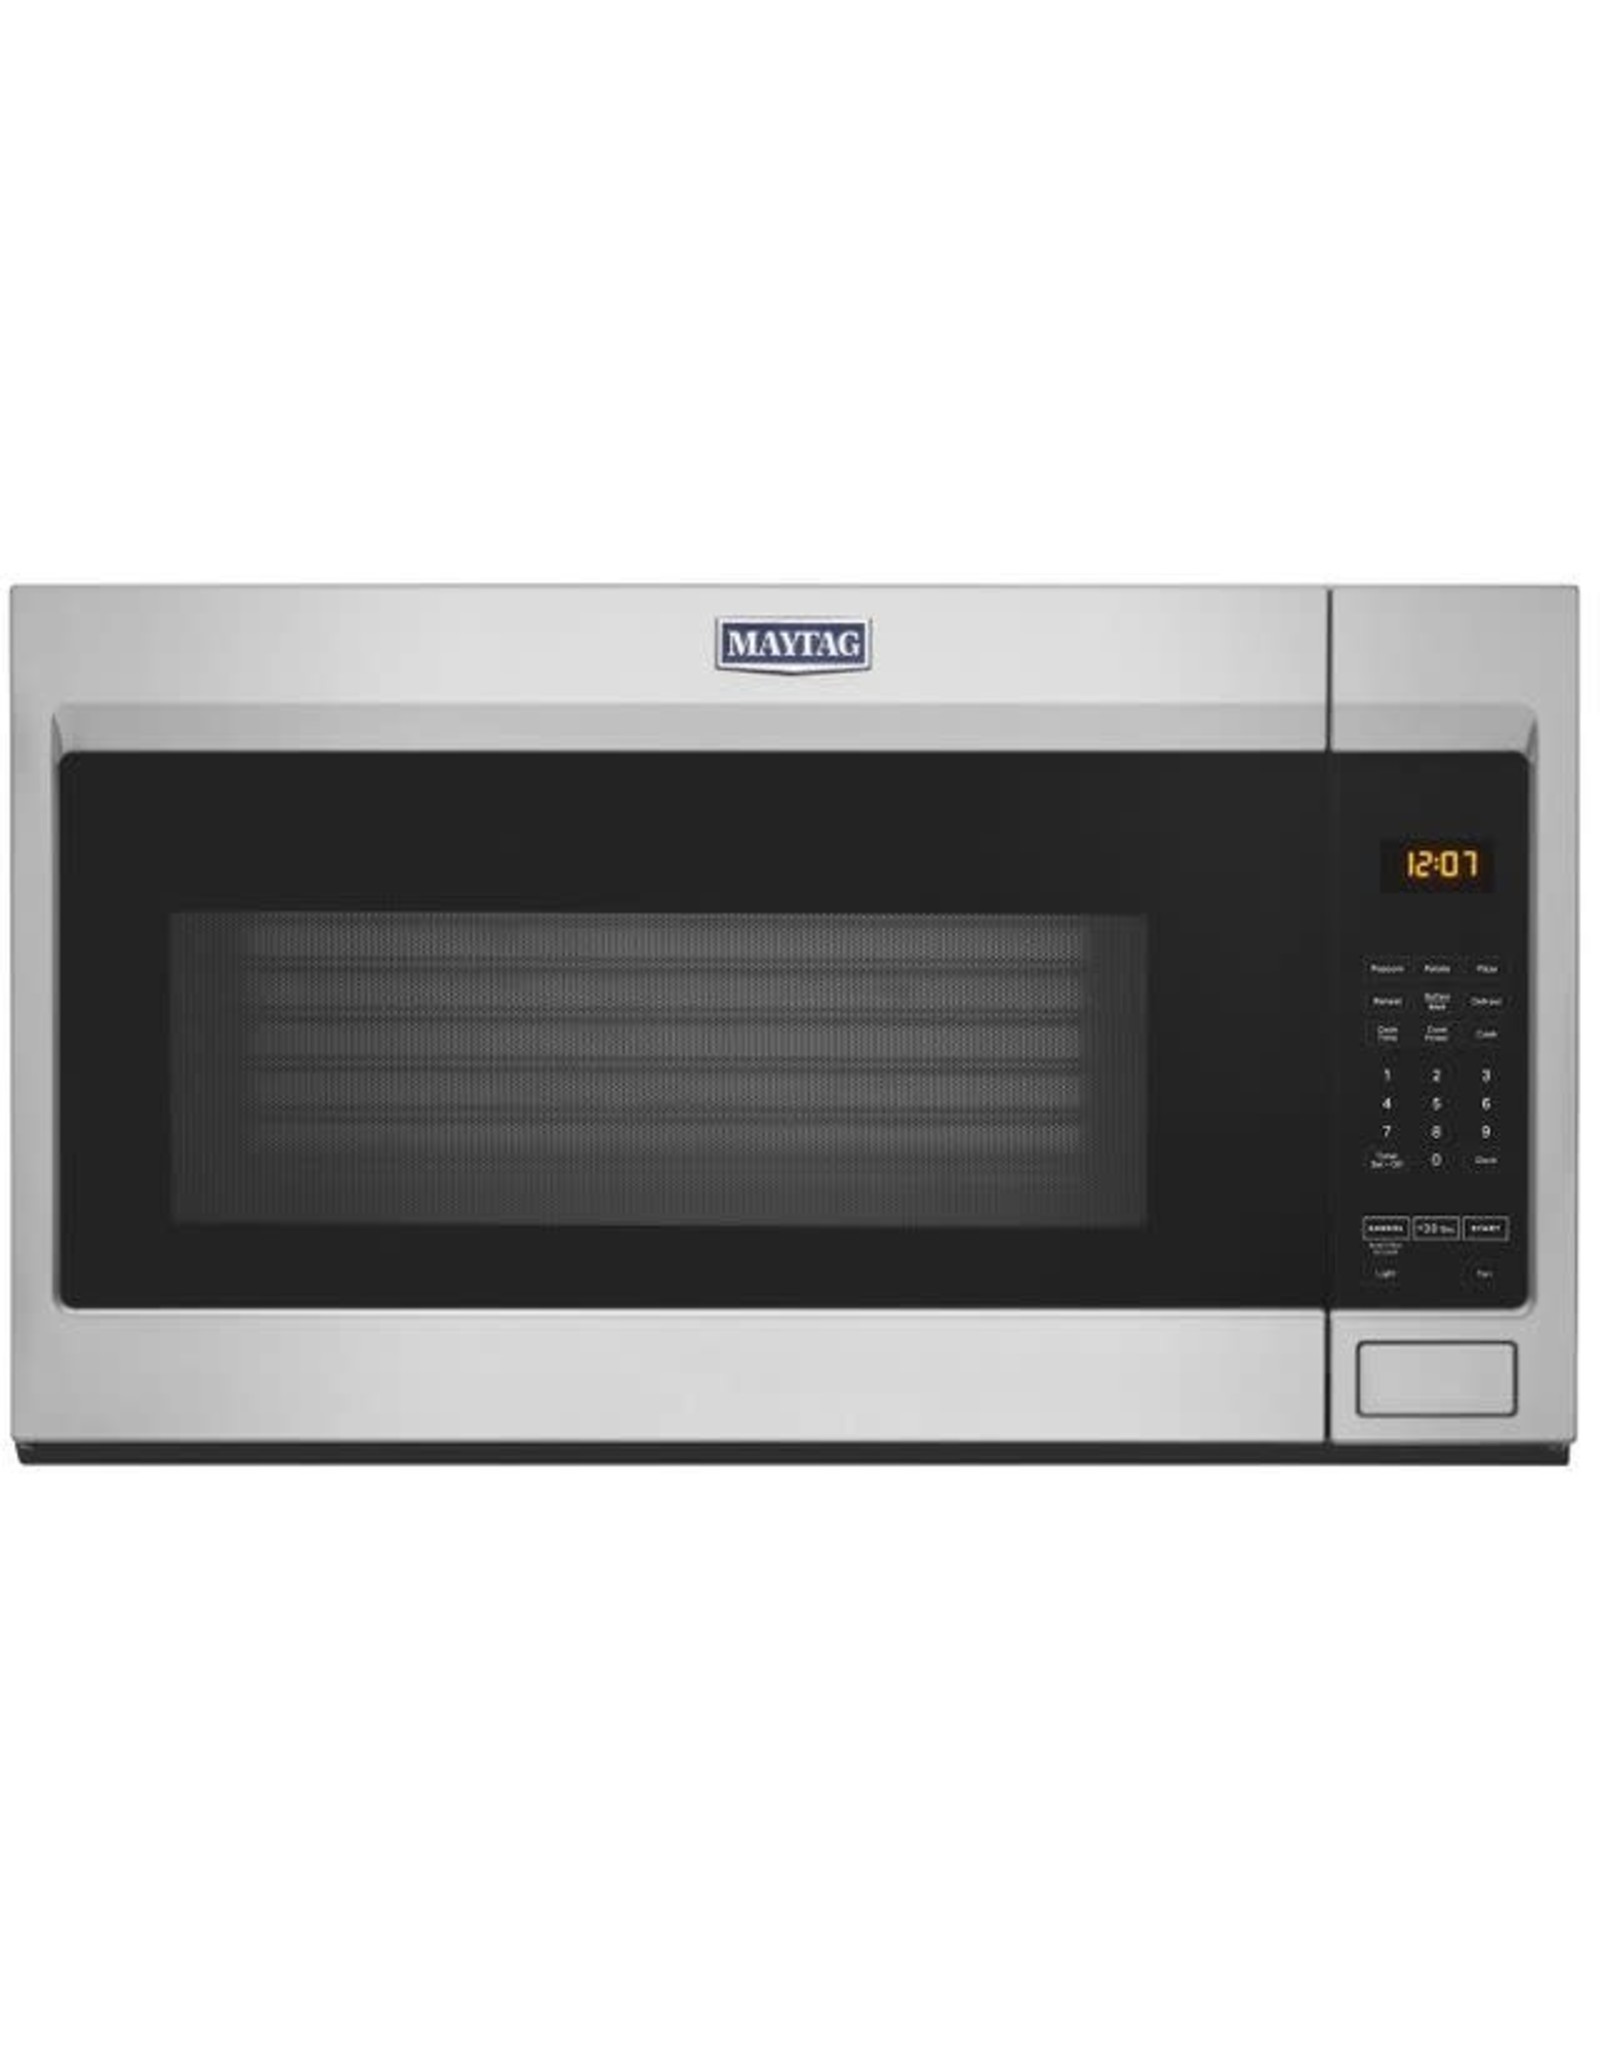 MMV1175JZ Maytag – 1.9 Cu. Ft. Over-the-Range Microwave – Stainless steel Maytag – 1.9 Cu. Ft. Over-the-Range Microwave – Stainless steel